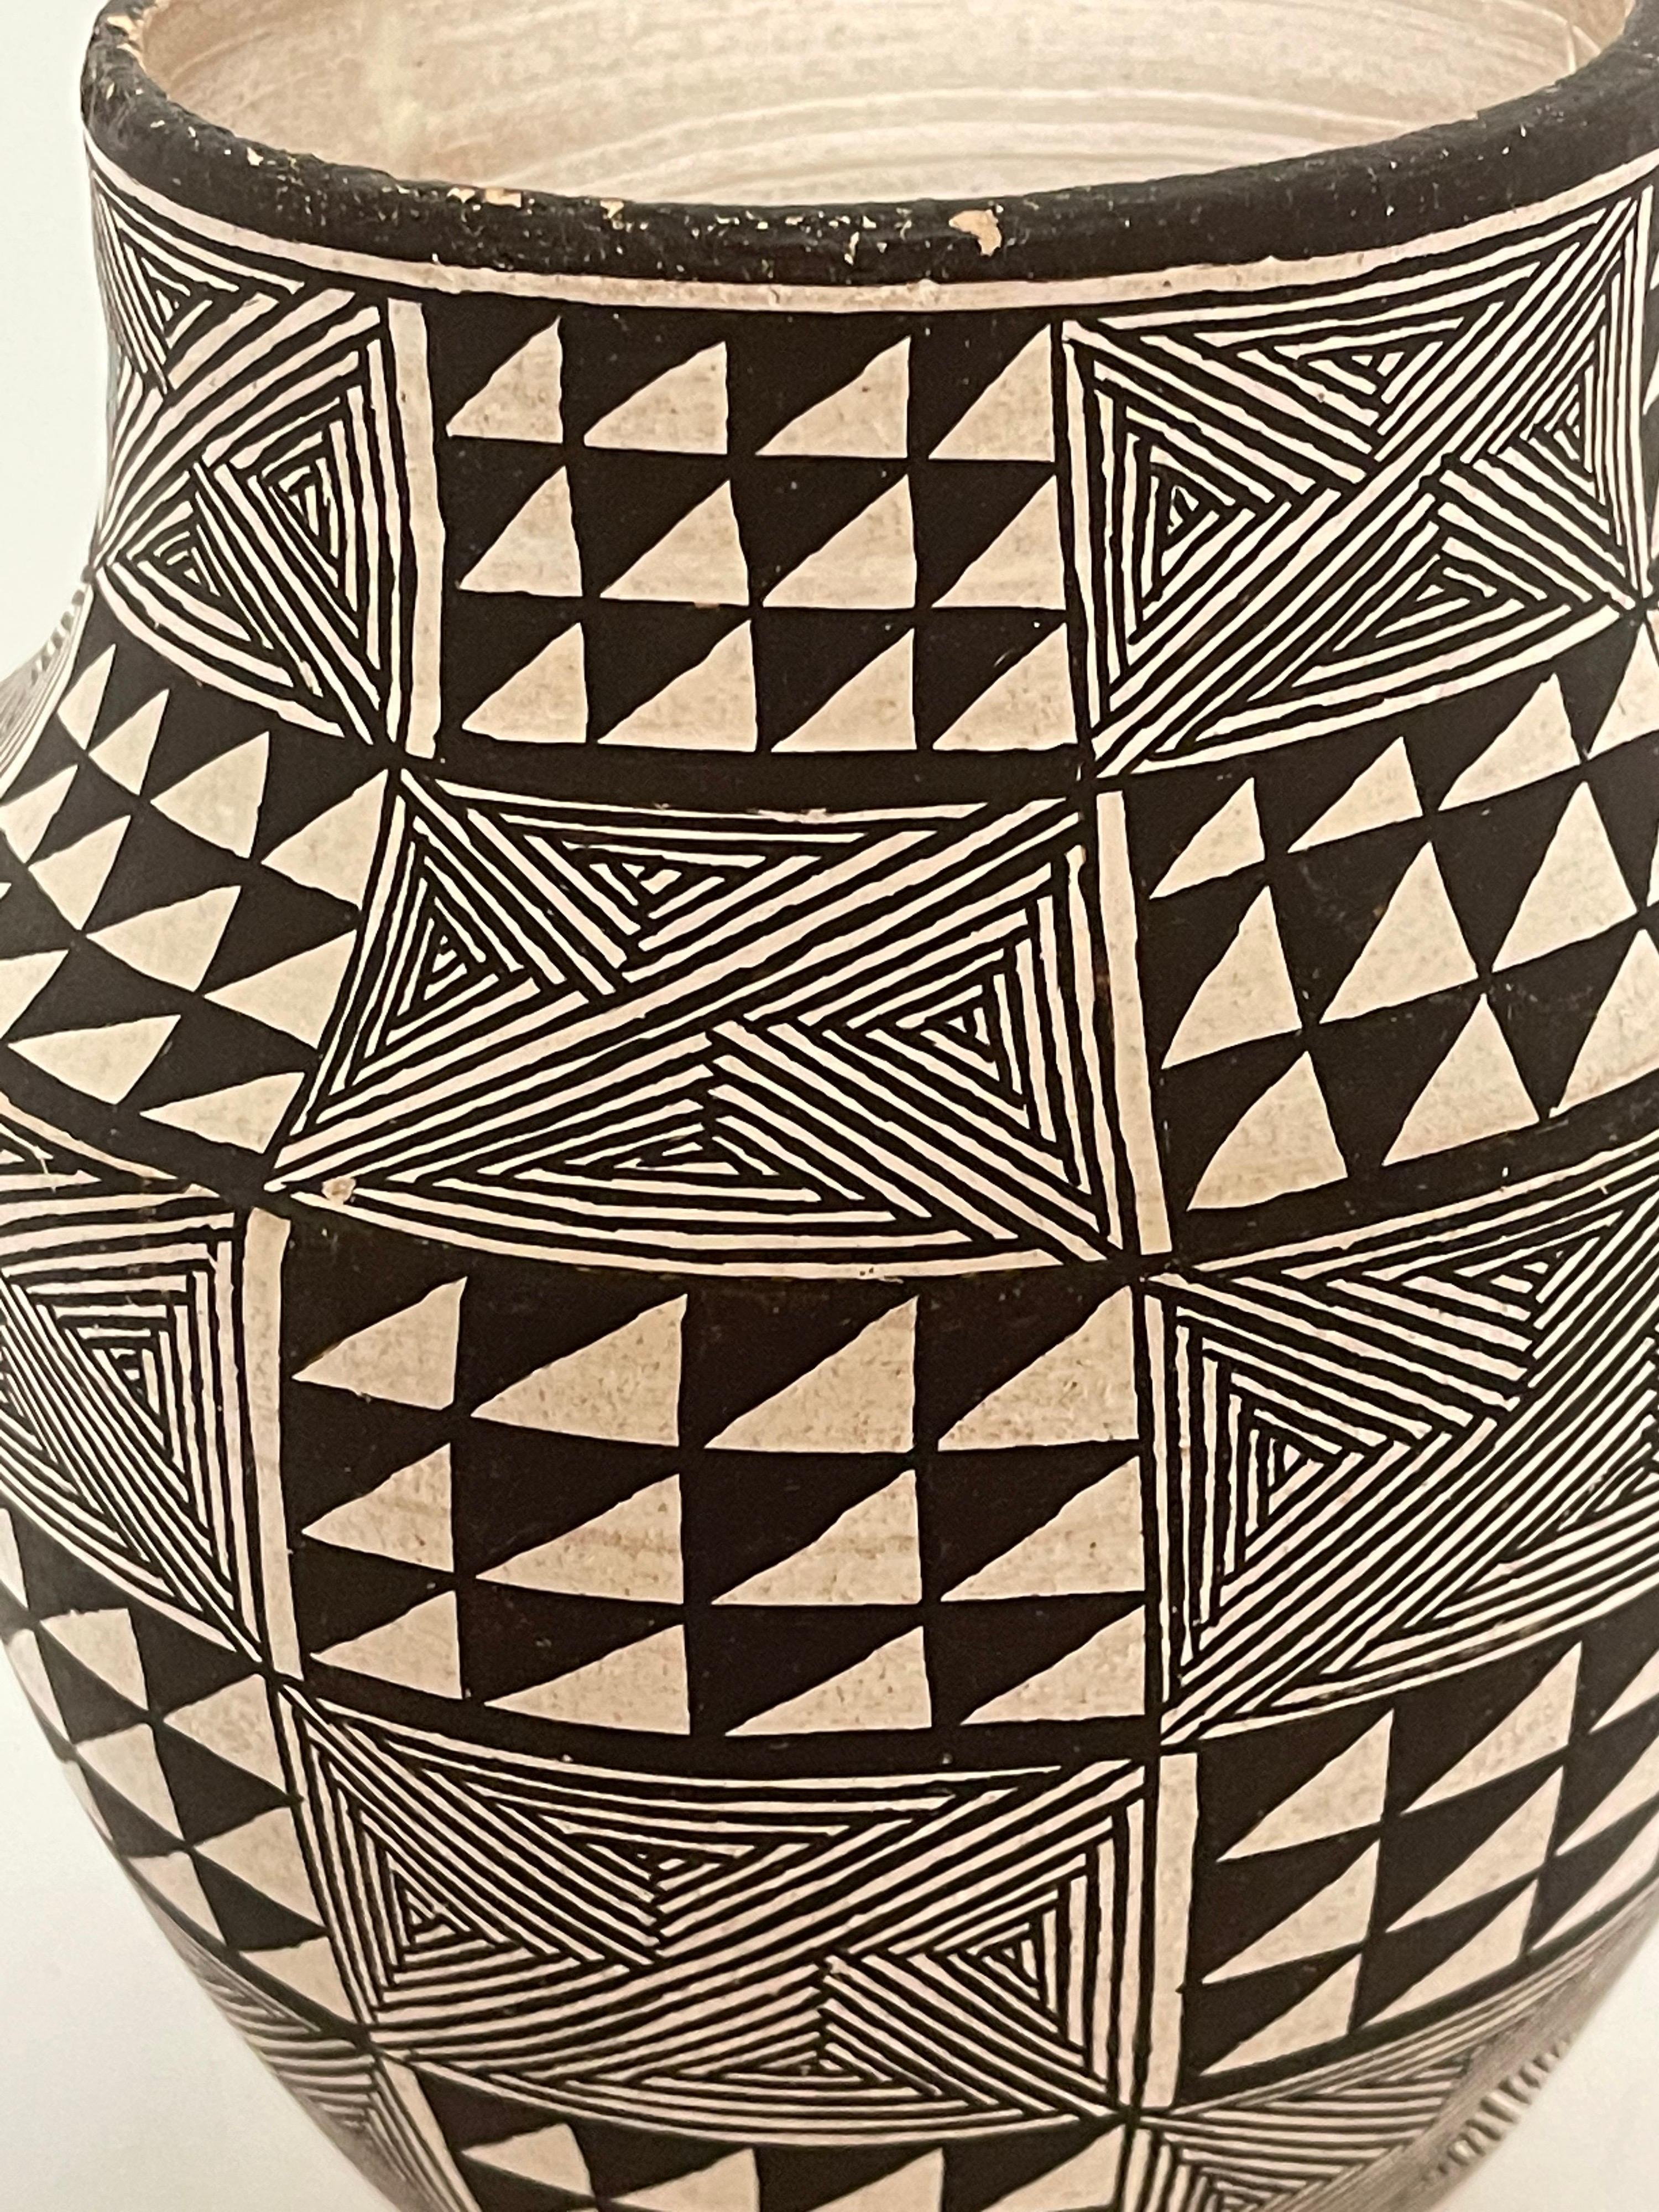 Hand-Crafted Lucy Lewis Acoma Vessel, 1984